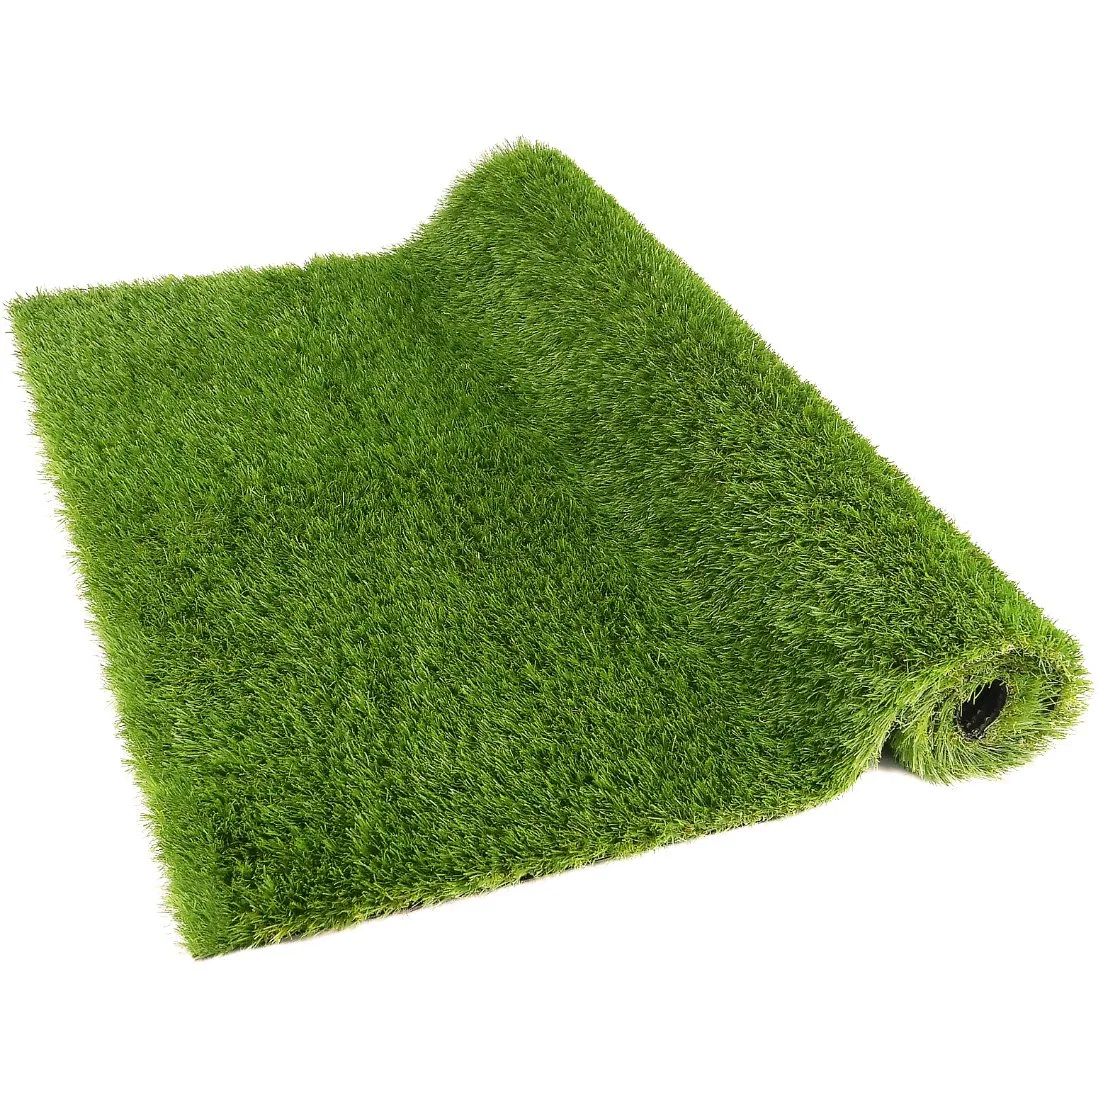 for Landscaping Recreation Lw Plastic Woven Bags Synthetic Turf Grass